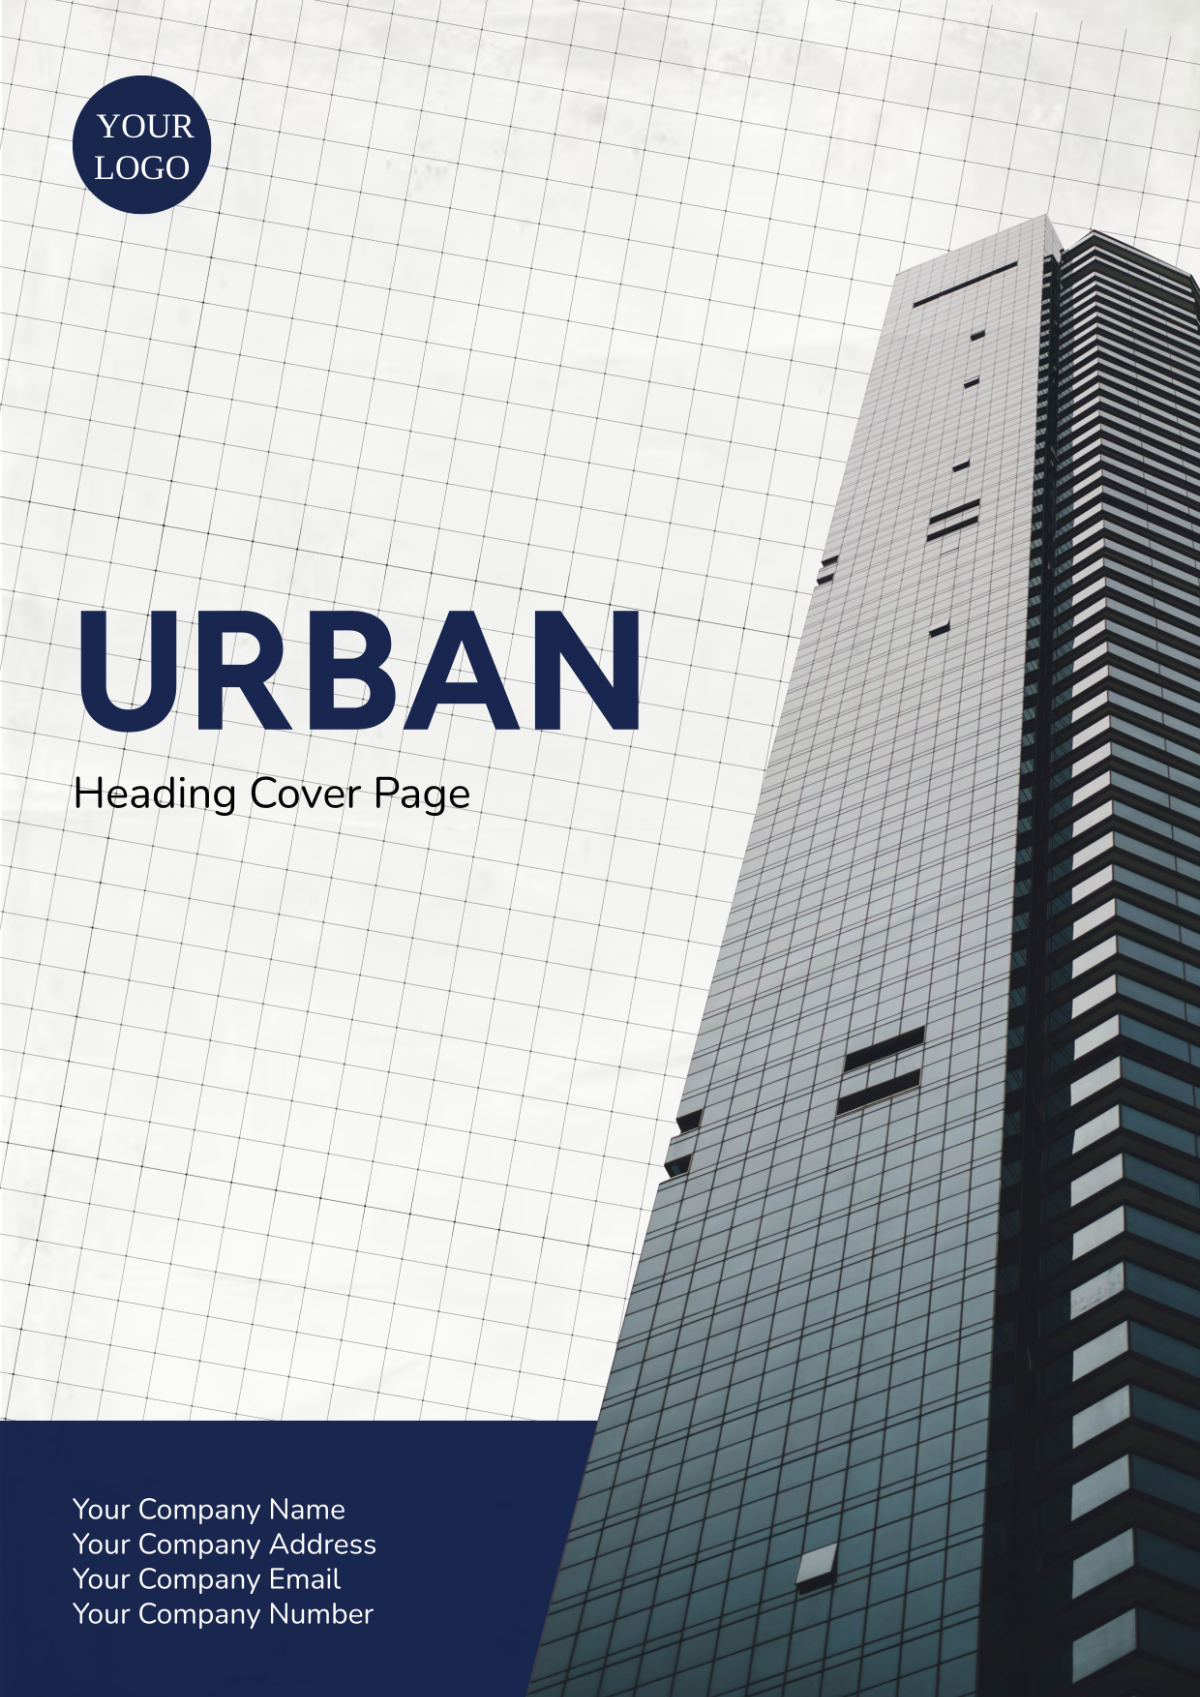 Urban Heading Cover Page